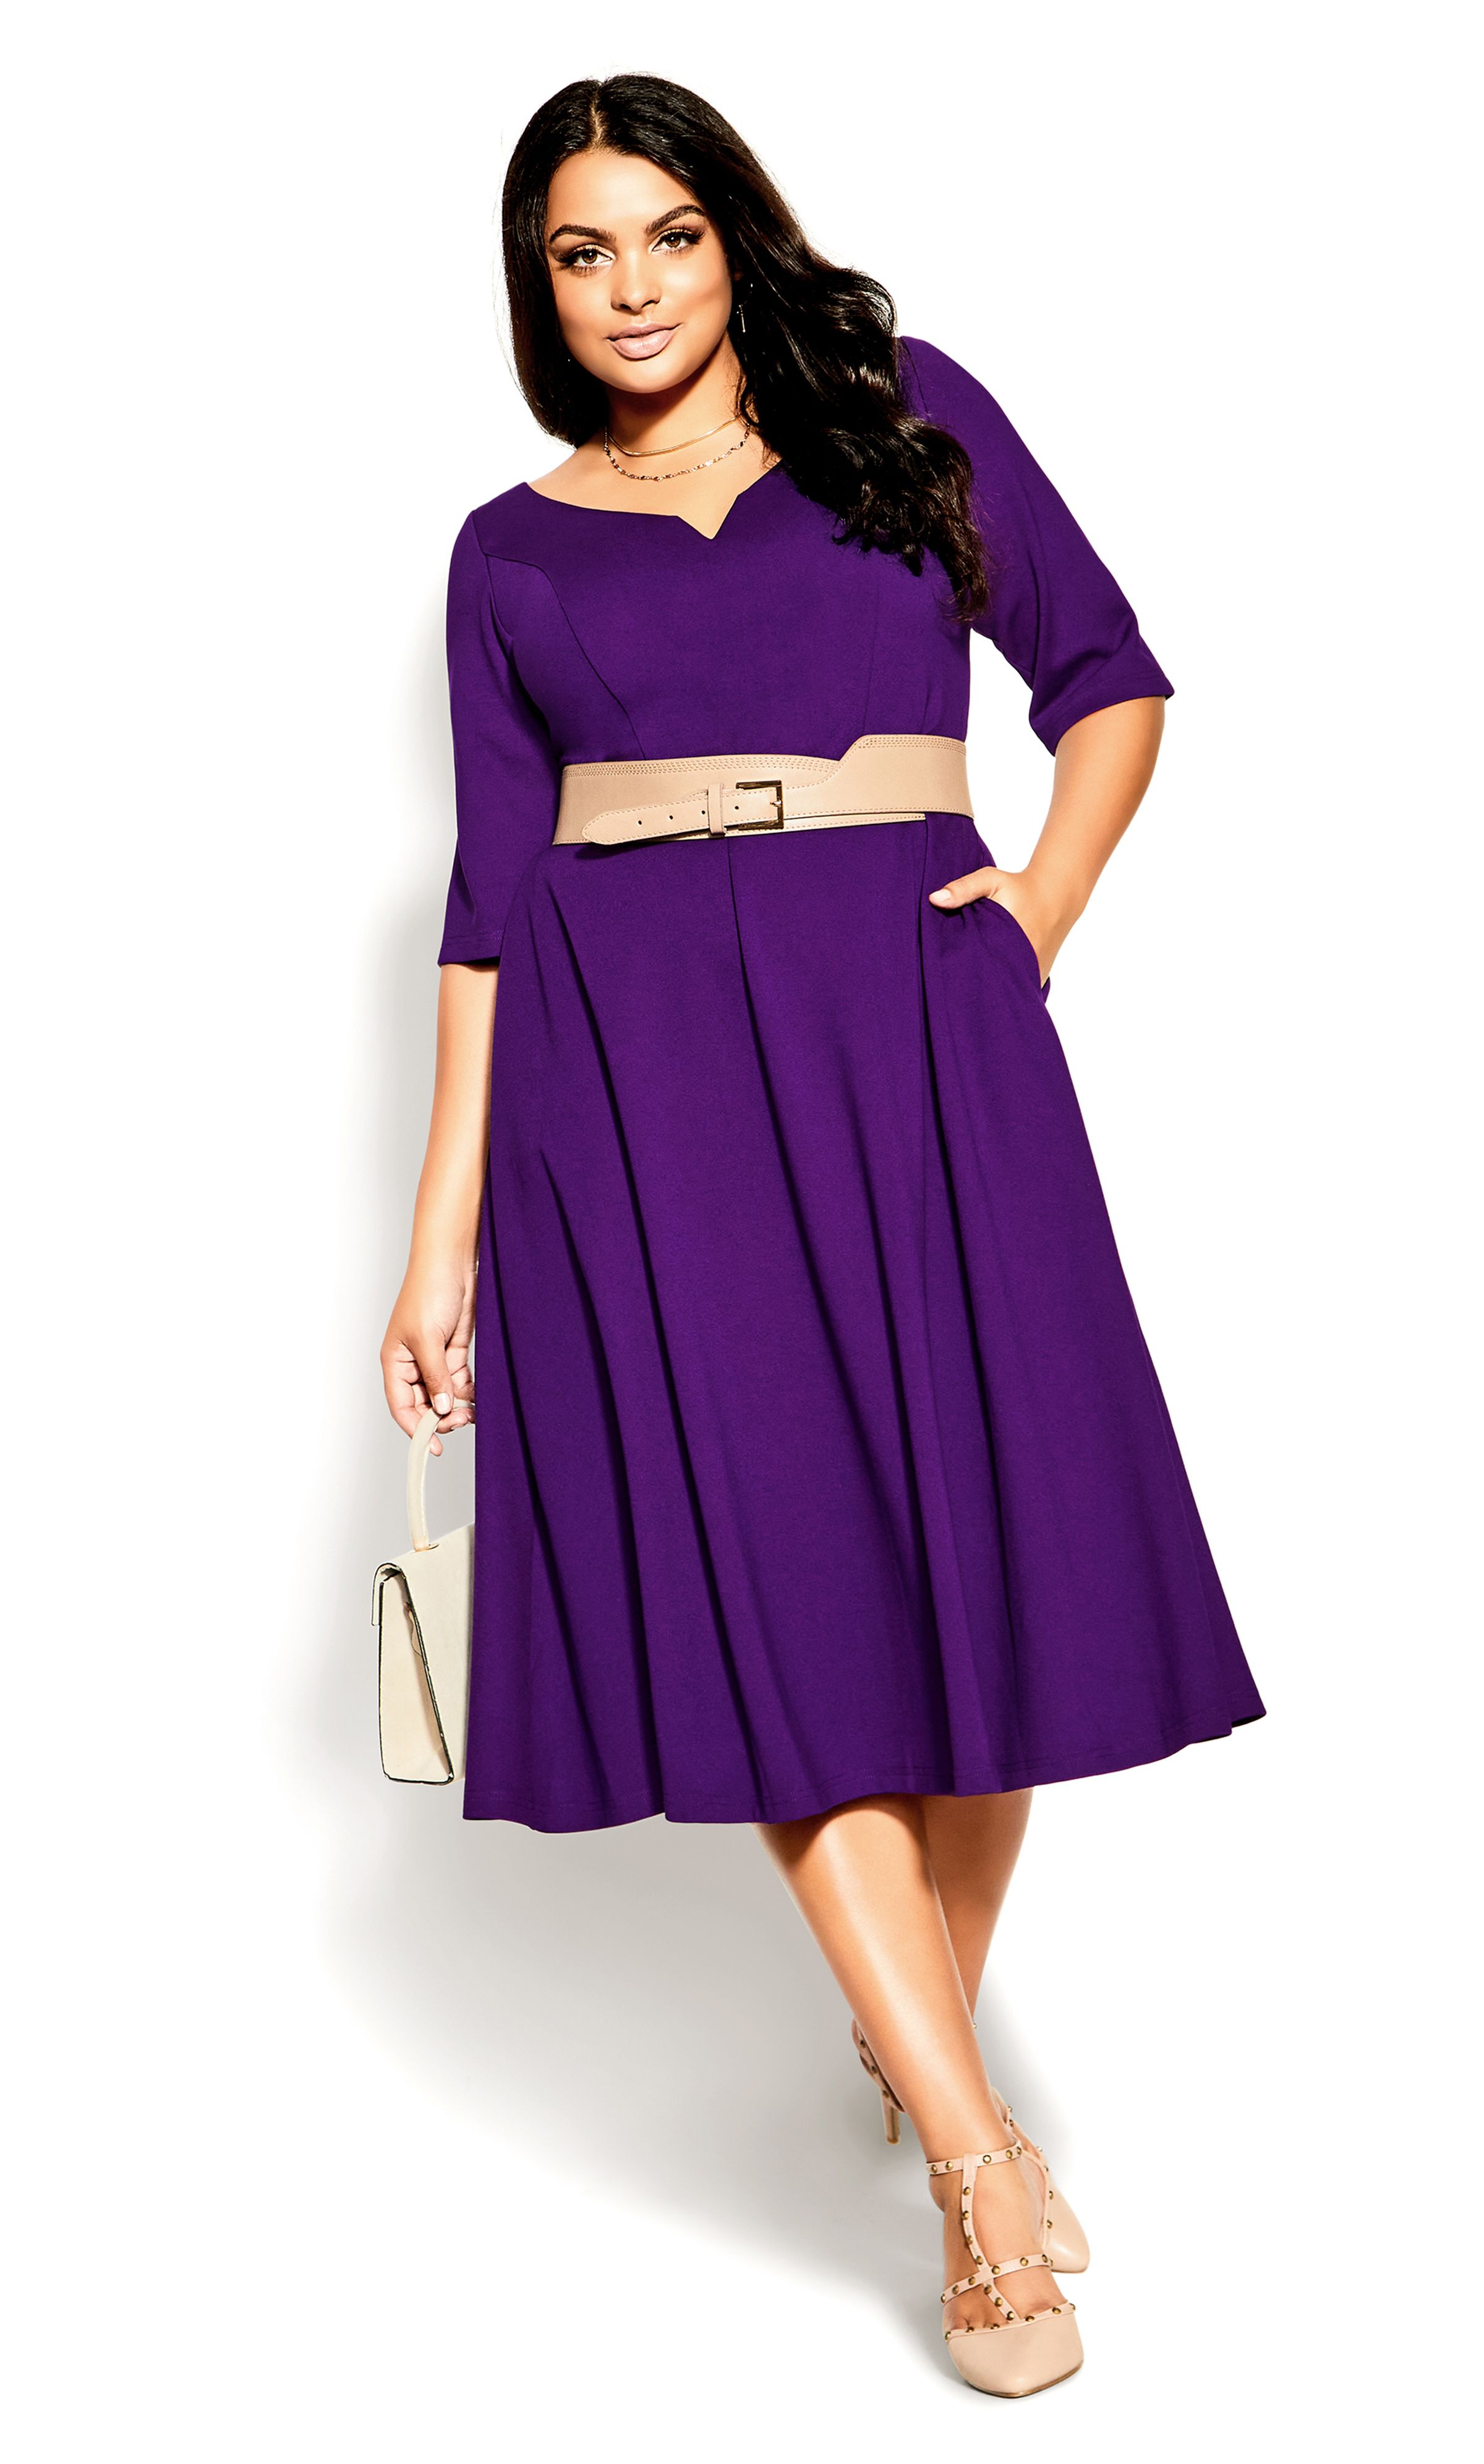 Perfect for date nights, evenings out or cocktail parties, the Cute Girl Elbow Sleeve Dress is the answer to every style woe! Showcasing a sweetheart V-neckline and flirty flared silhouette, this utterly form-flattering midi dress is perfect for versatile styling. Key Features Include: - Deep sweetheart V-neckline - Elbow sleeves - A-line skirt - Lined to the waist - Side pockets - Heavyweight stretch fabrication - Midi length Level up the glam with shiny pumps and sparkling drop earrings.